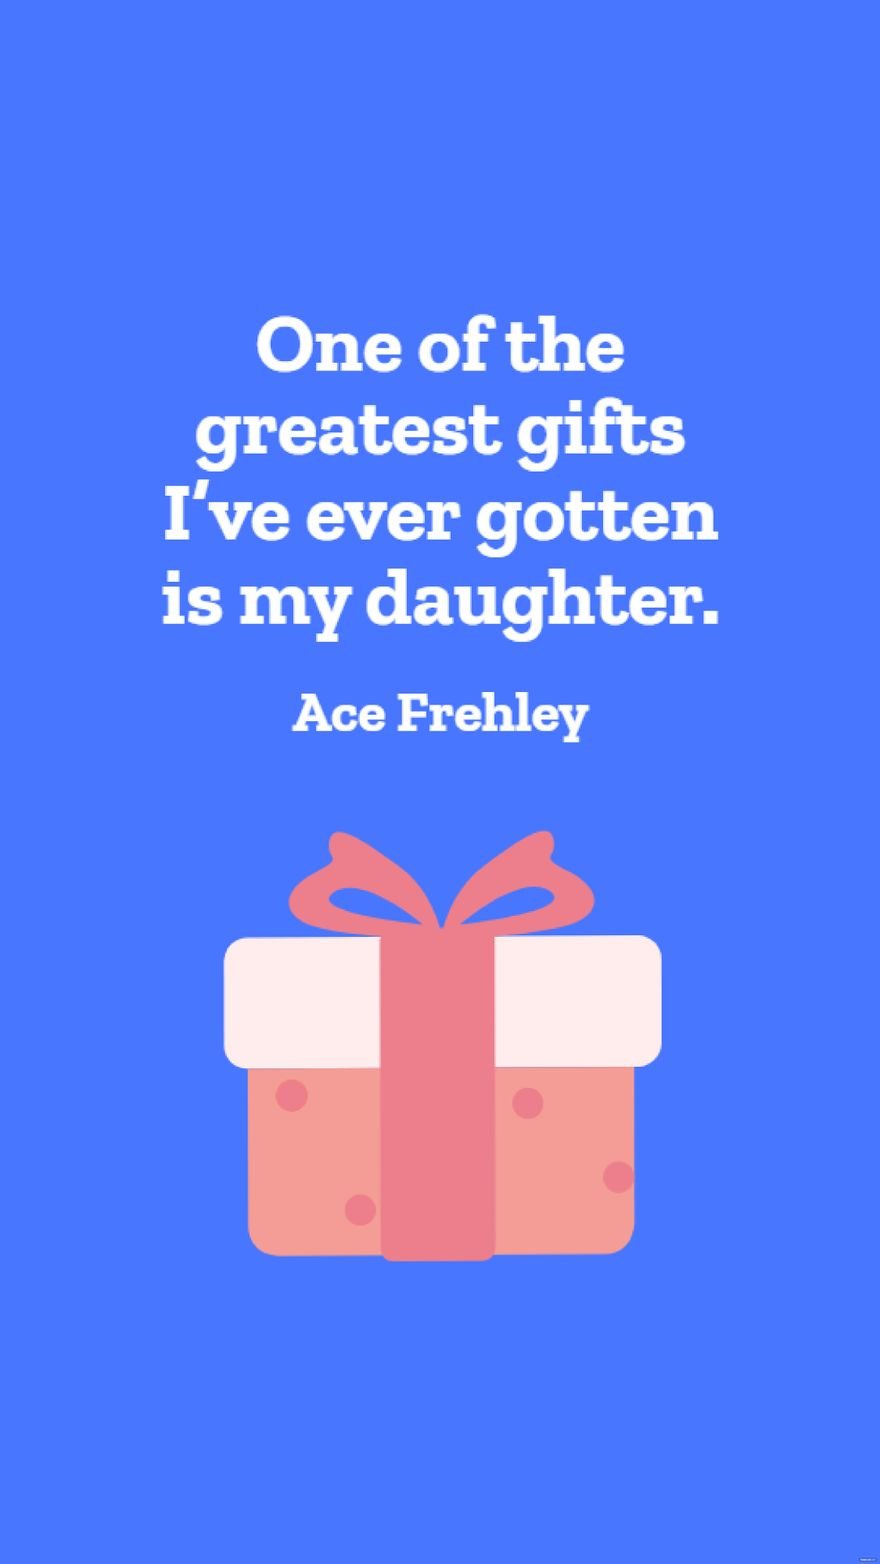 Ace Frehley - One of the greatest gifts I’ve ever gotten is my daughter.